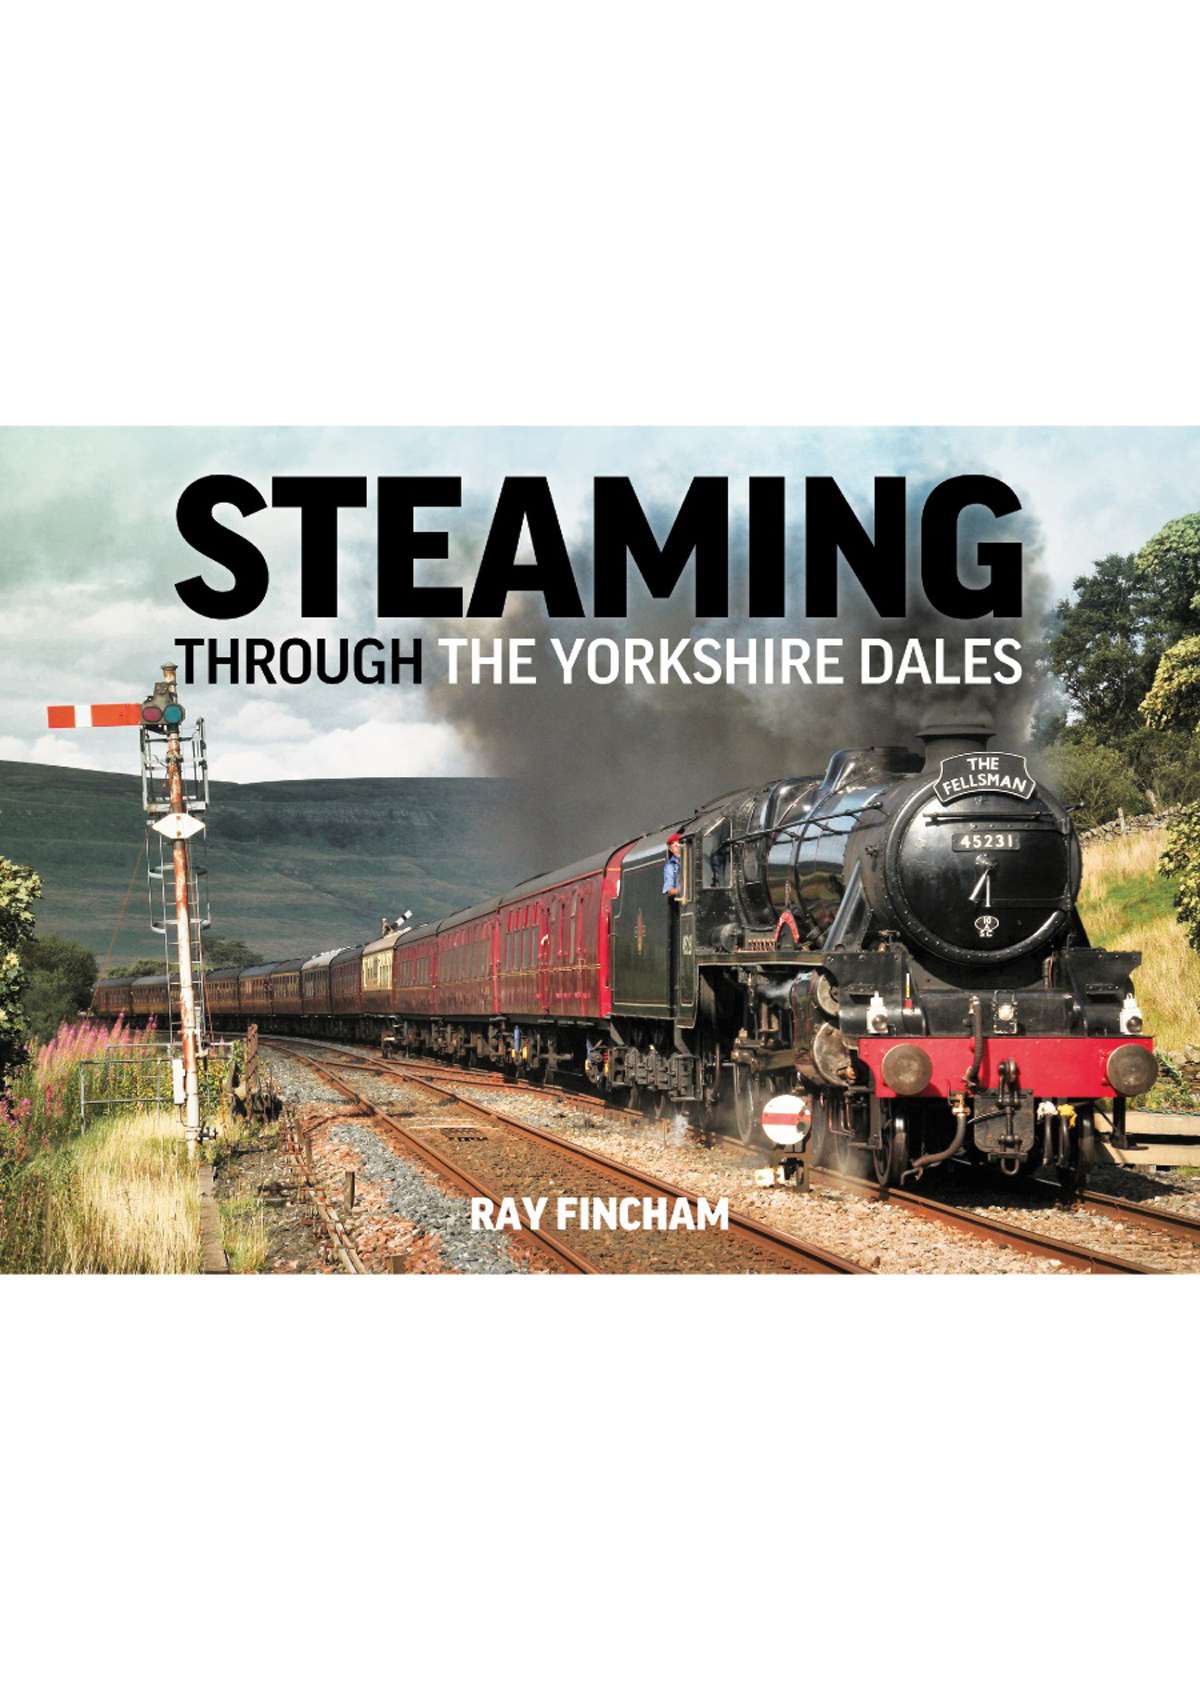 Book : Steaming through the Yorkshire Dales